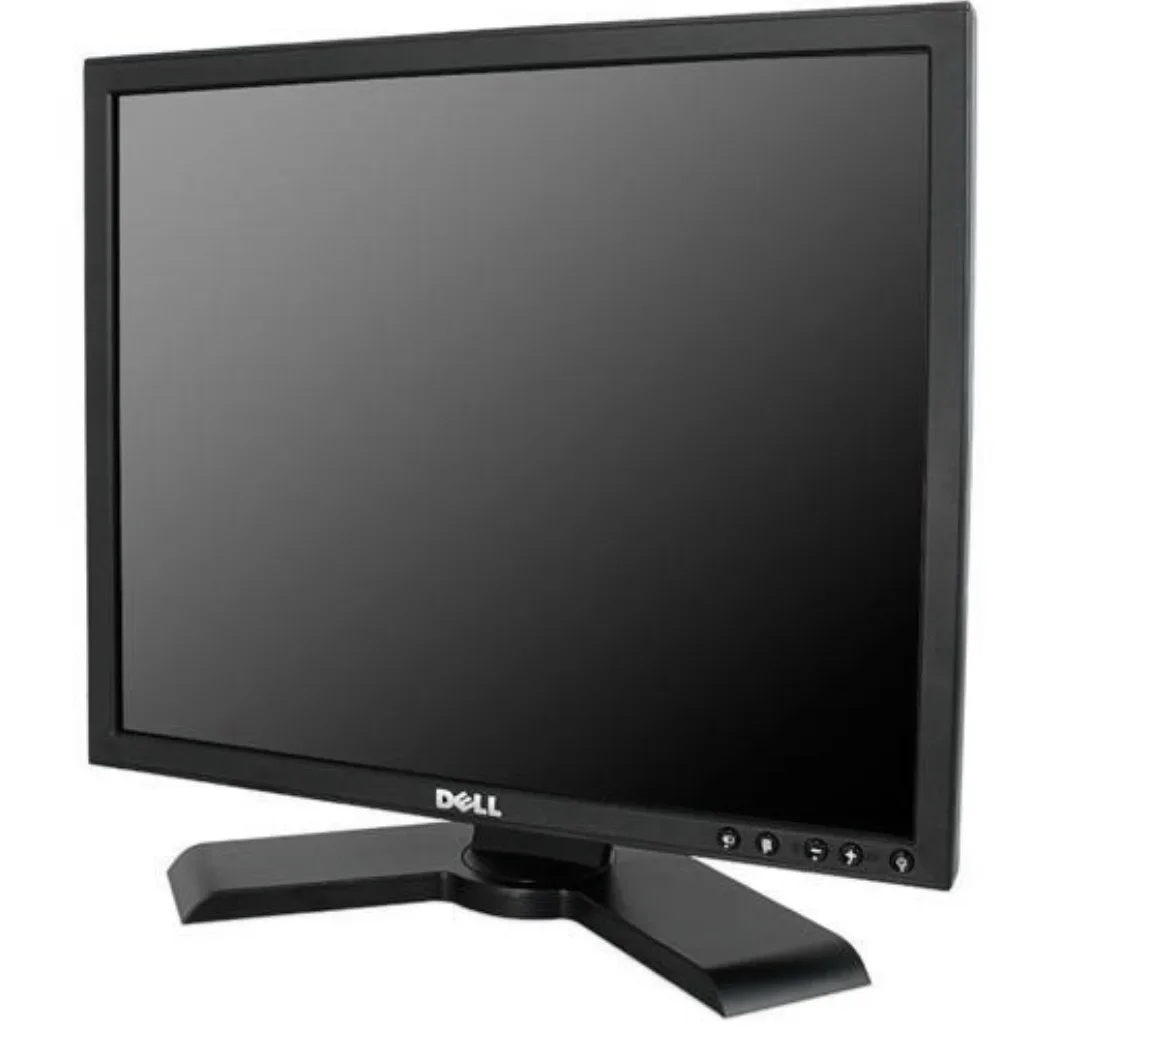 Dell AND HP Lenovo Samsung MIX Brand LCD Monitor 19 Inch Square Office / Home / CCTV (Grade A Refurbished)